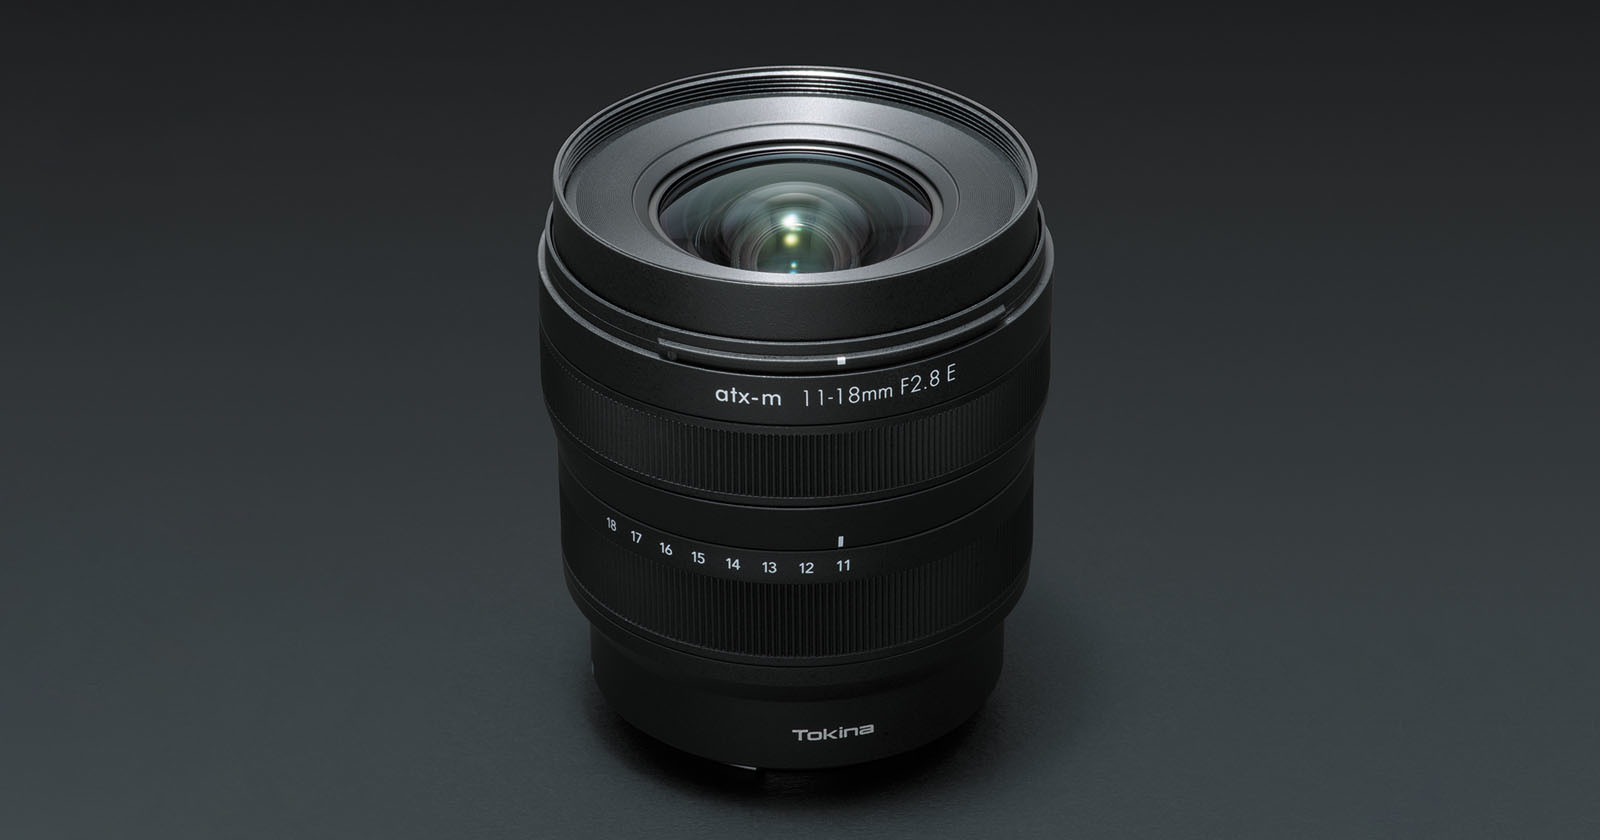 Tokina’s Latest is the 11-18mm f/2.8 for Sony APS-C Cameras